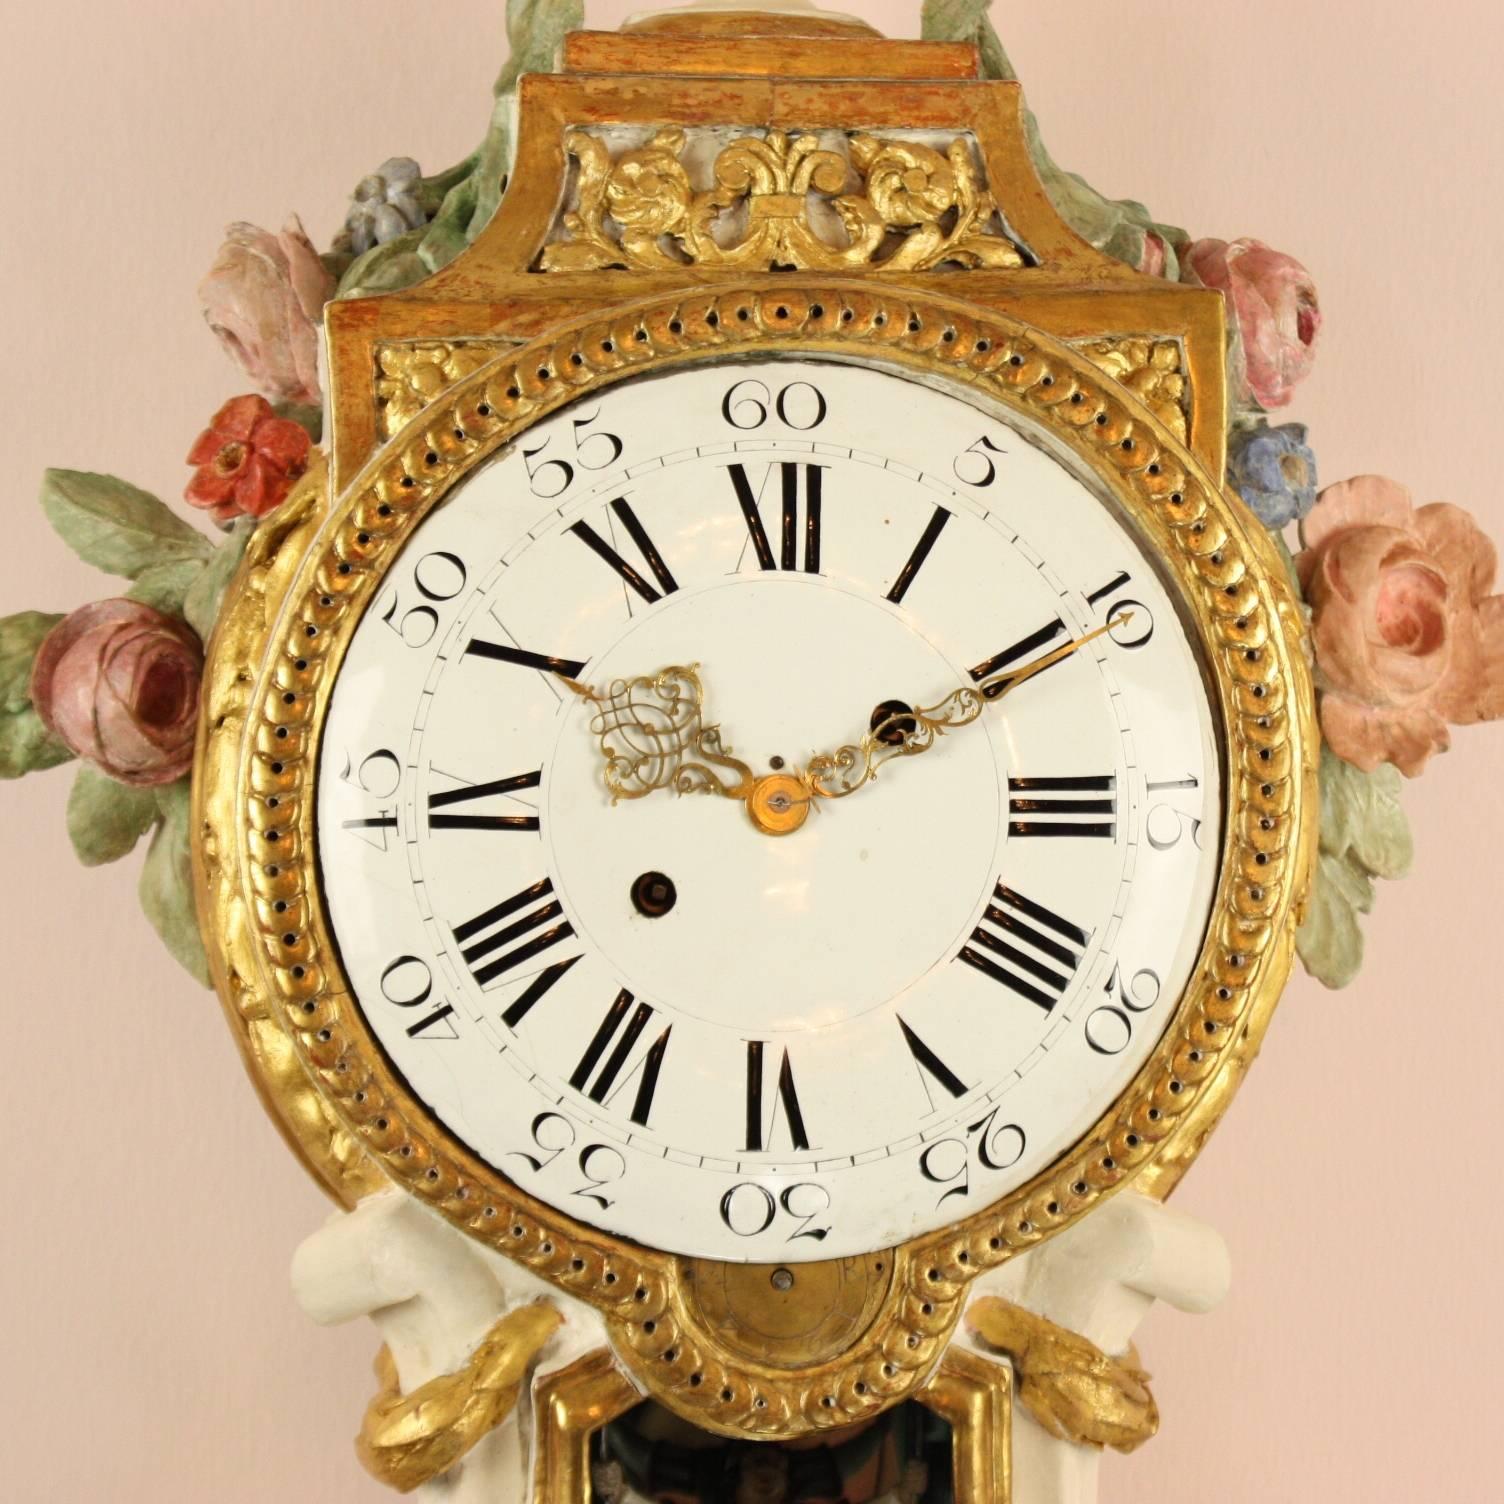 A large late 18th century Prussian carved wood, painted and parcel-gilt sonnerie bracket clock with wall bracket. The dished white enamel dial with Roman and Arabic numerals and pierced gilt hands, the barrel movement with verge escapement, striking